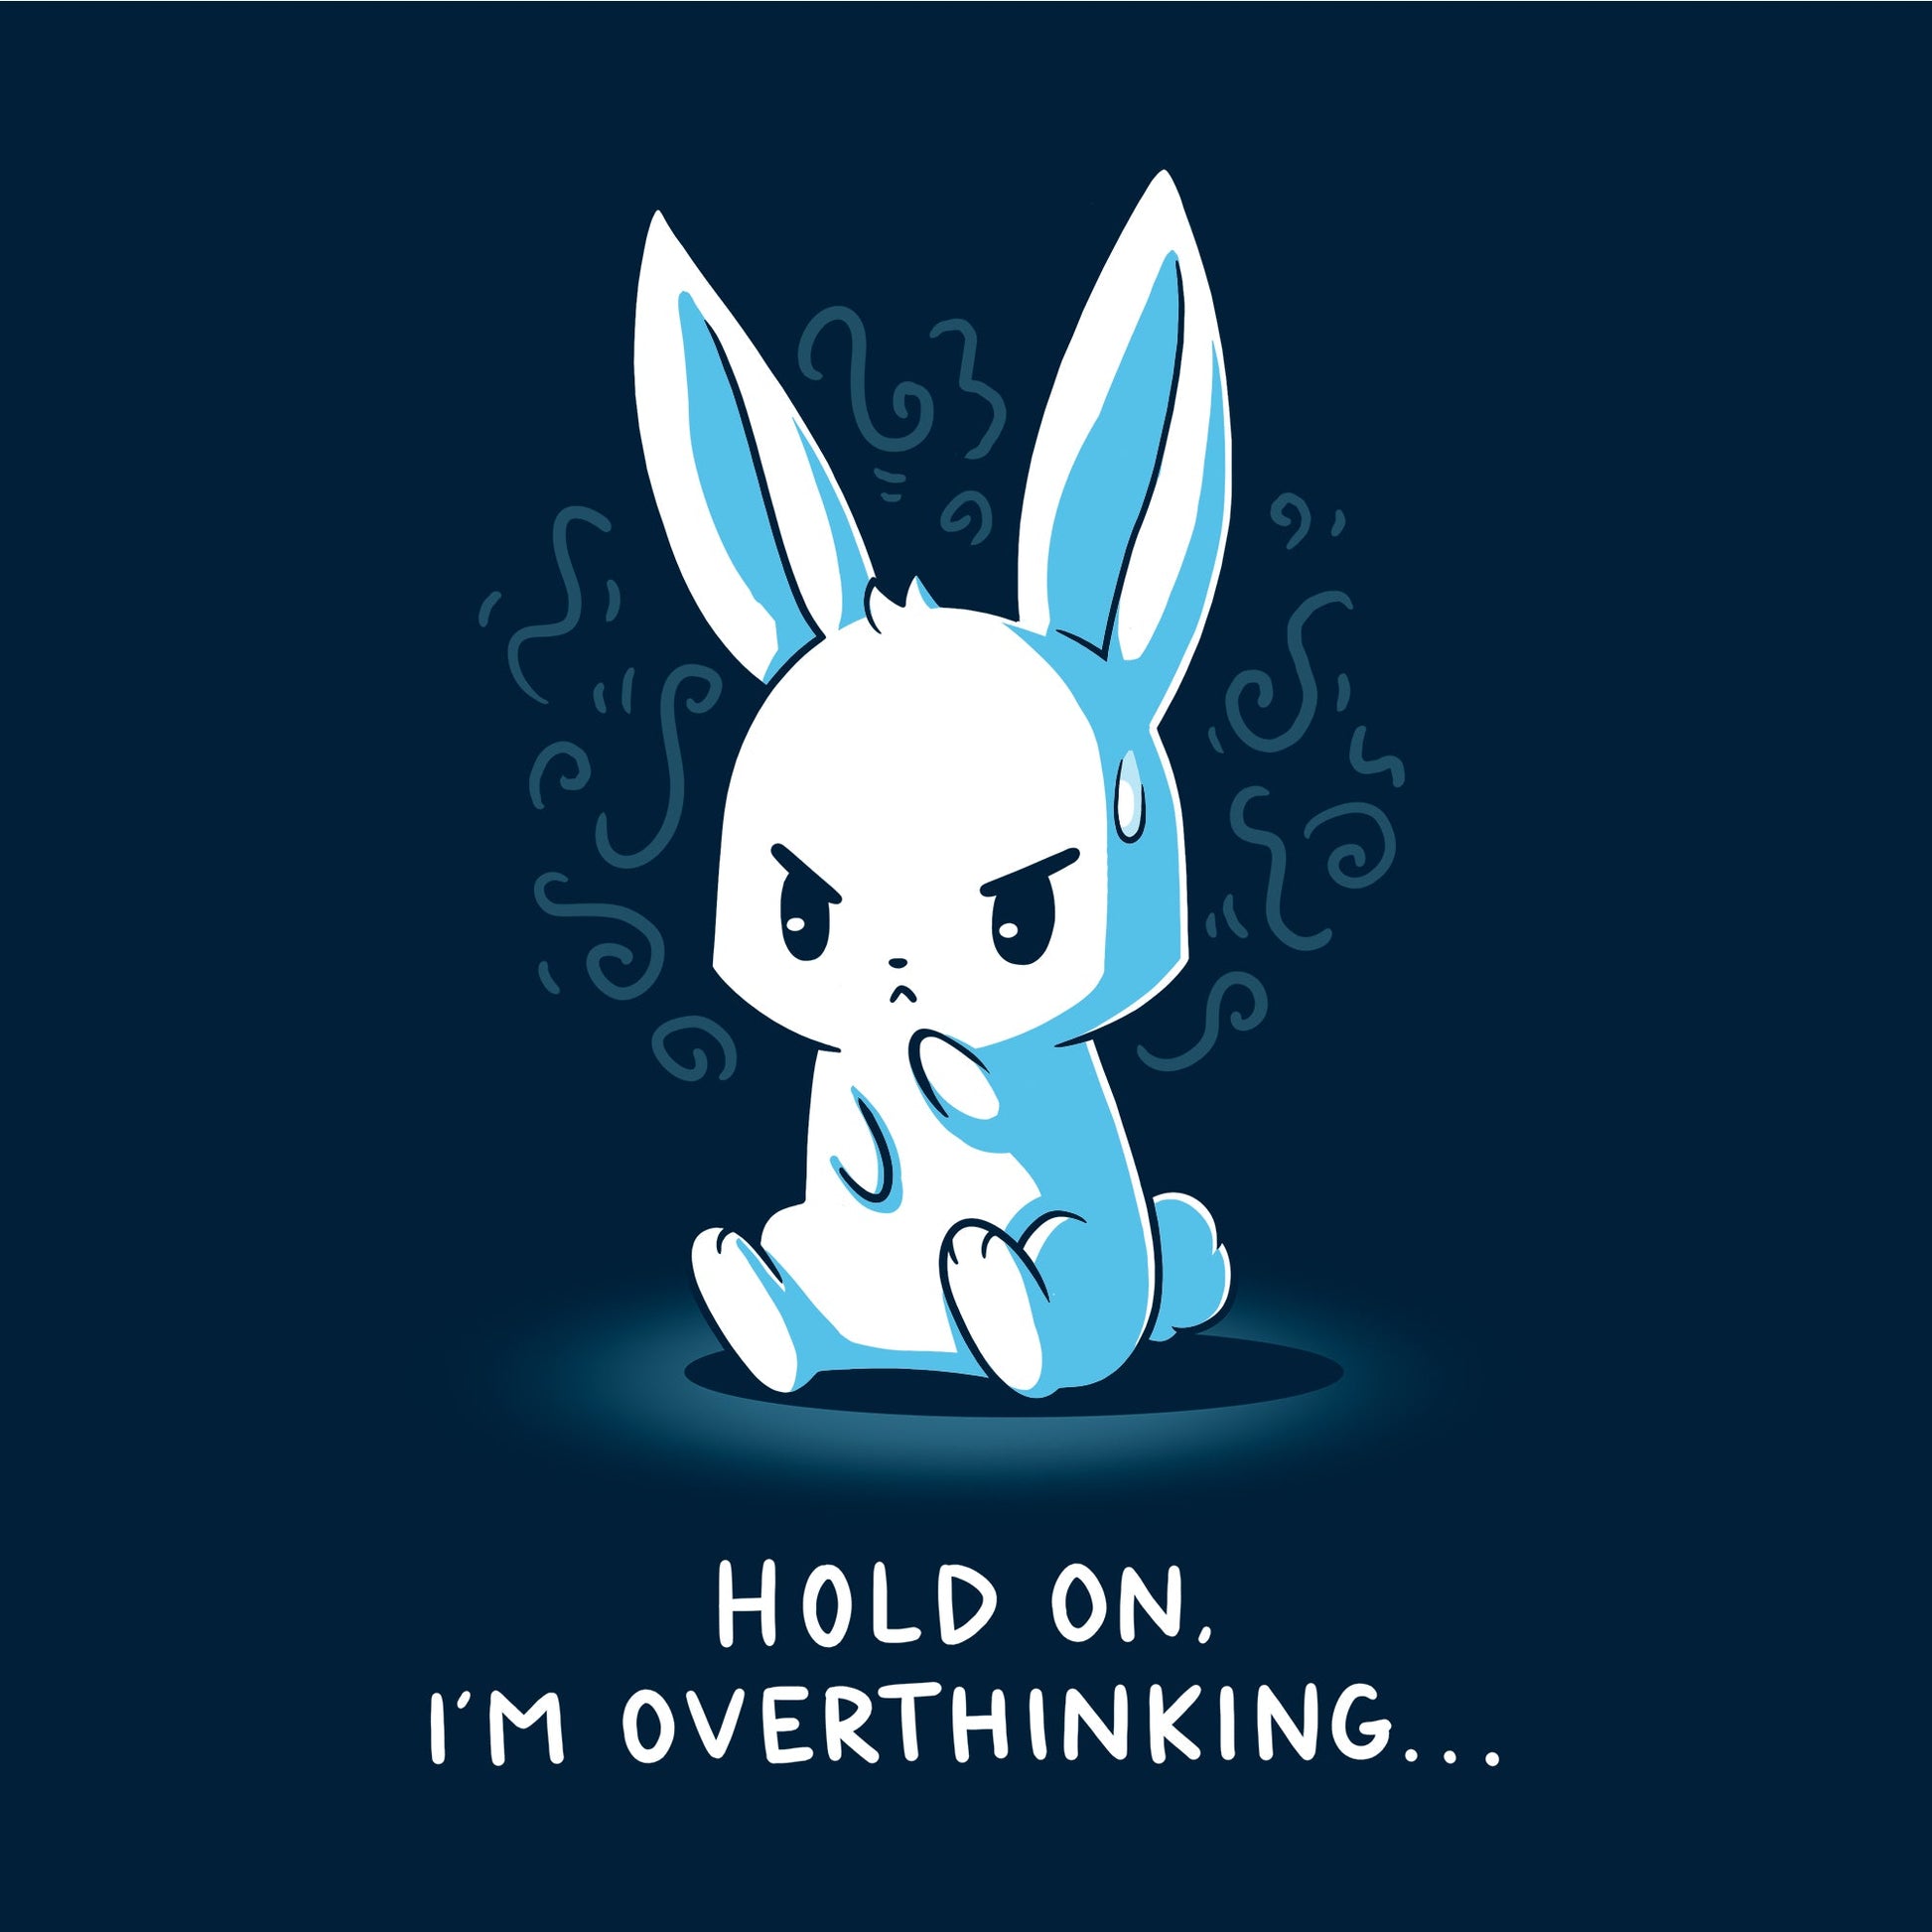 Classic Cotton T-shirt_TeeTurtle navy blue I Think, Therefore I Have Anxiety. Featuring an over-thinking, anxious bunny.